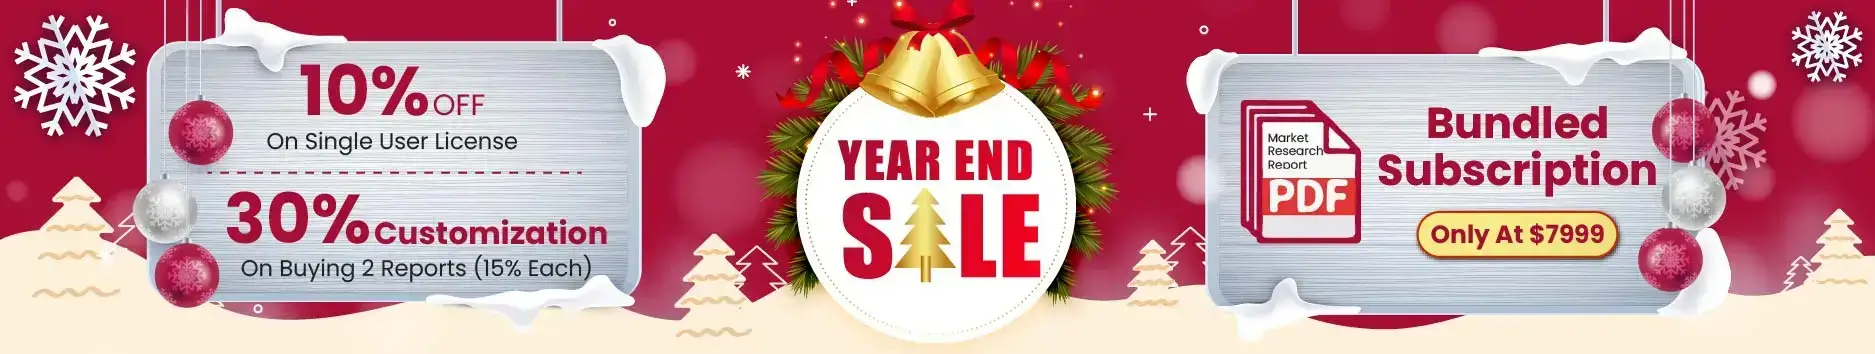 Year end offer